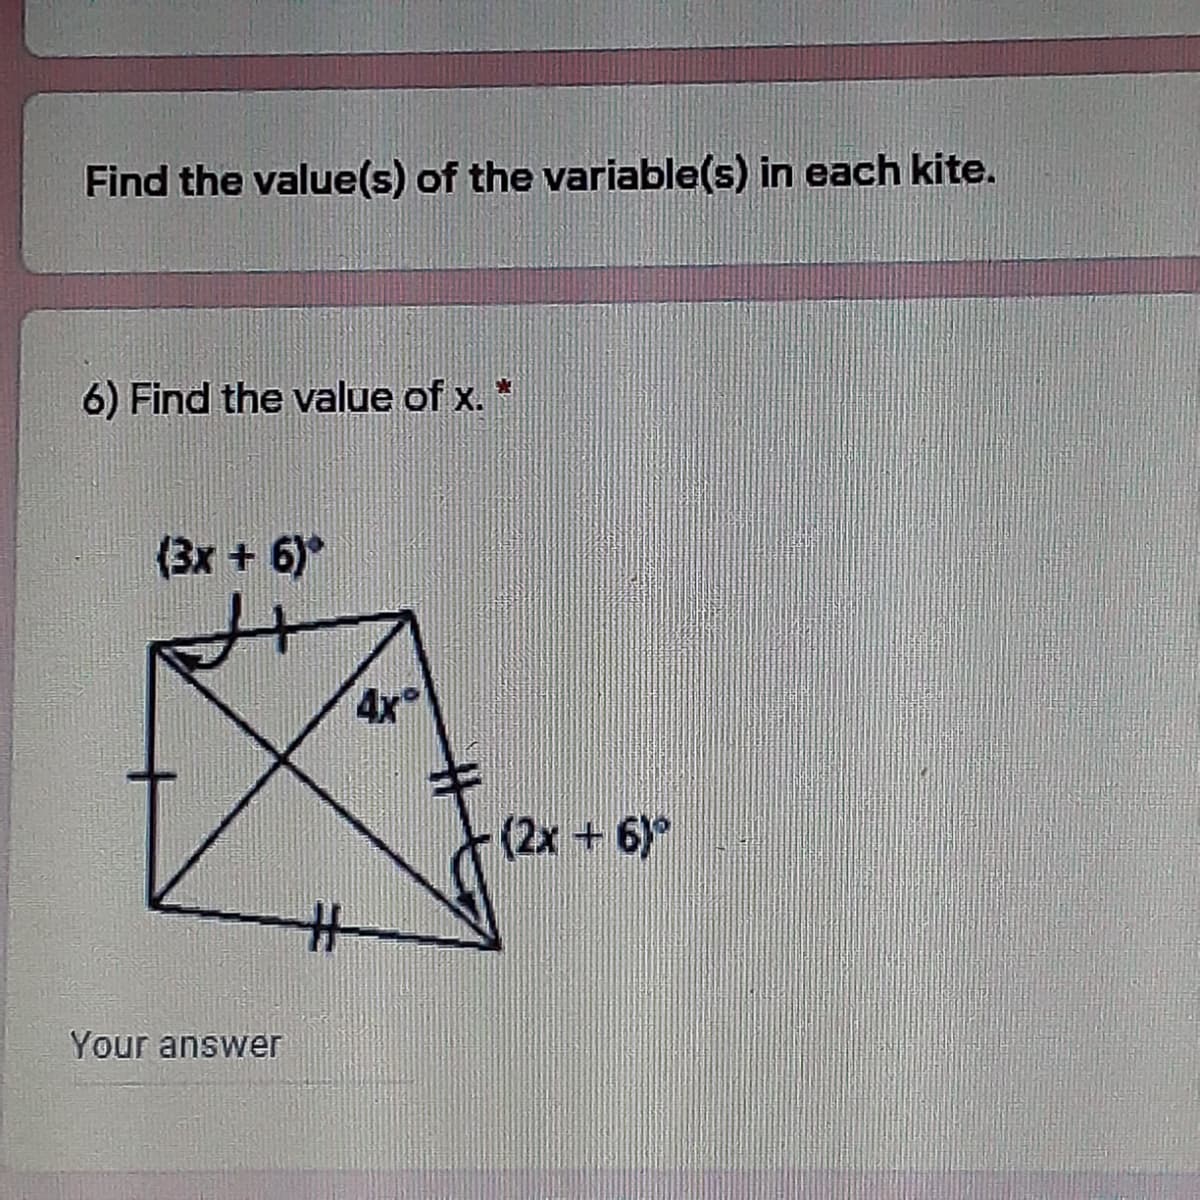 Find the value(s) of the variable(s) in each kite.
6) Find the value of x.*
(3x + 6)
4x
(2x +6)
#3
Your answer
